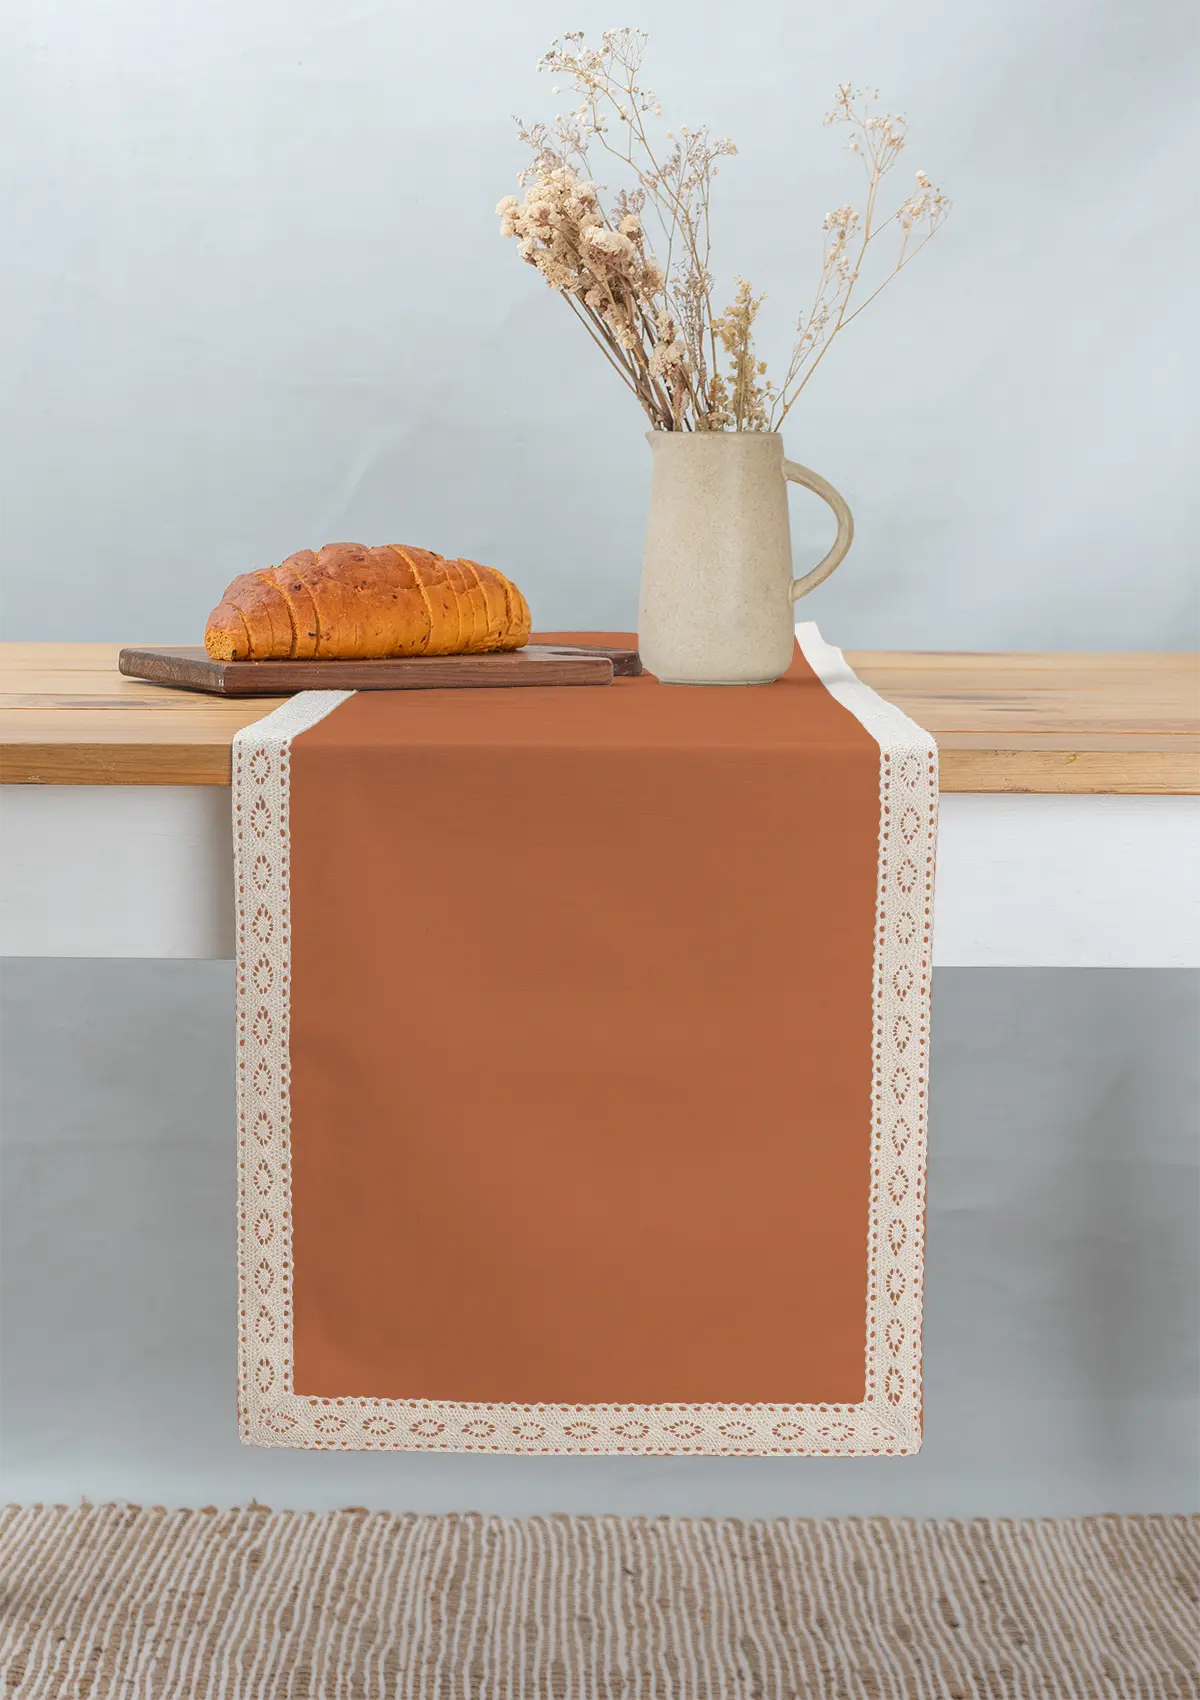 Solid orange 100% cotton plain table runner for 4 seater or 6 seater dining  with lace boarder